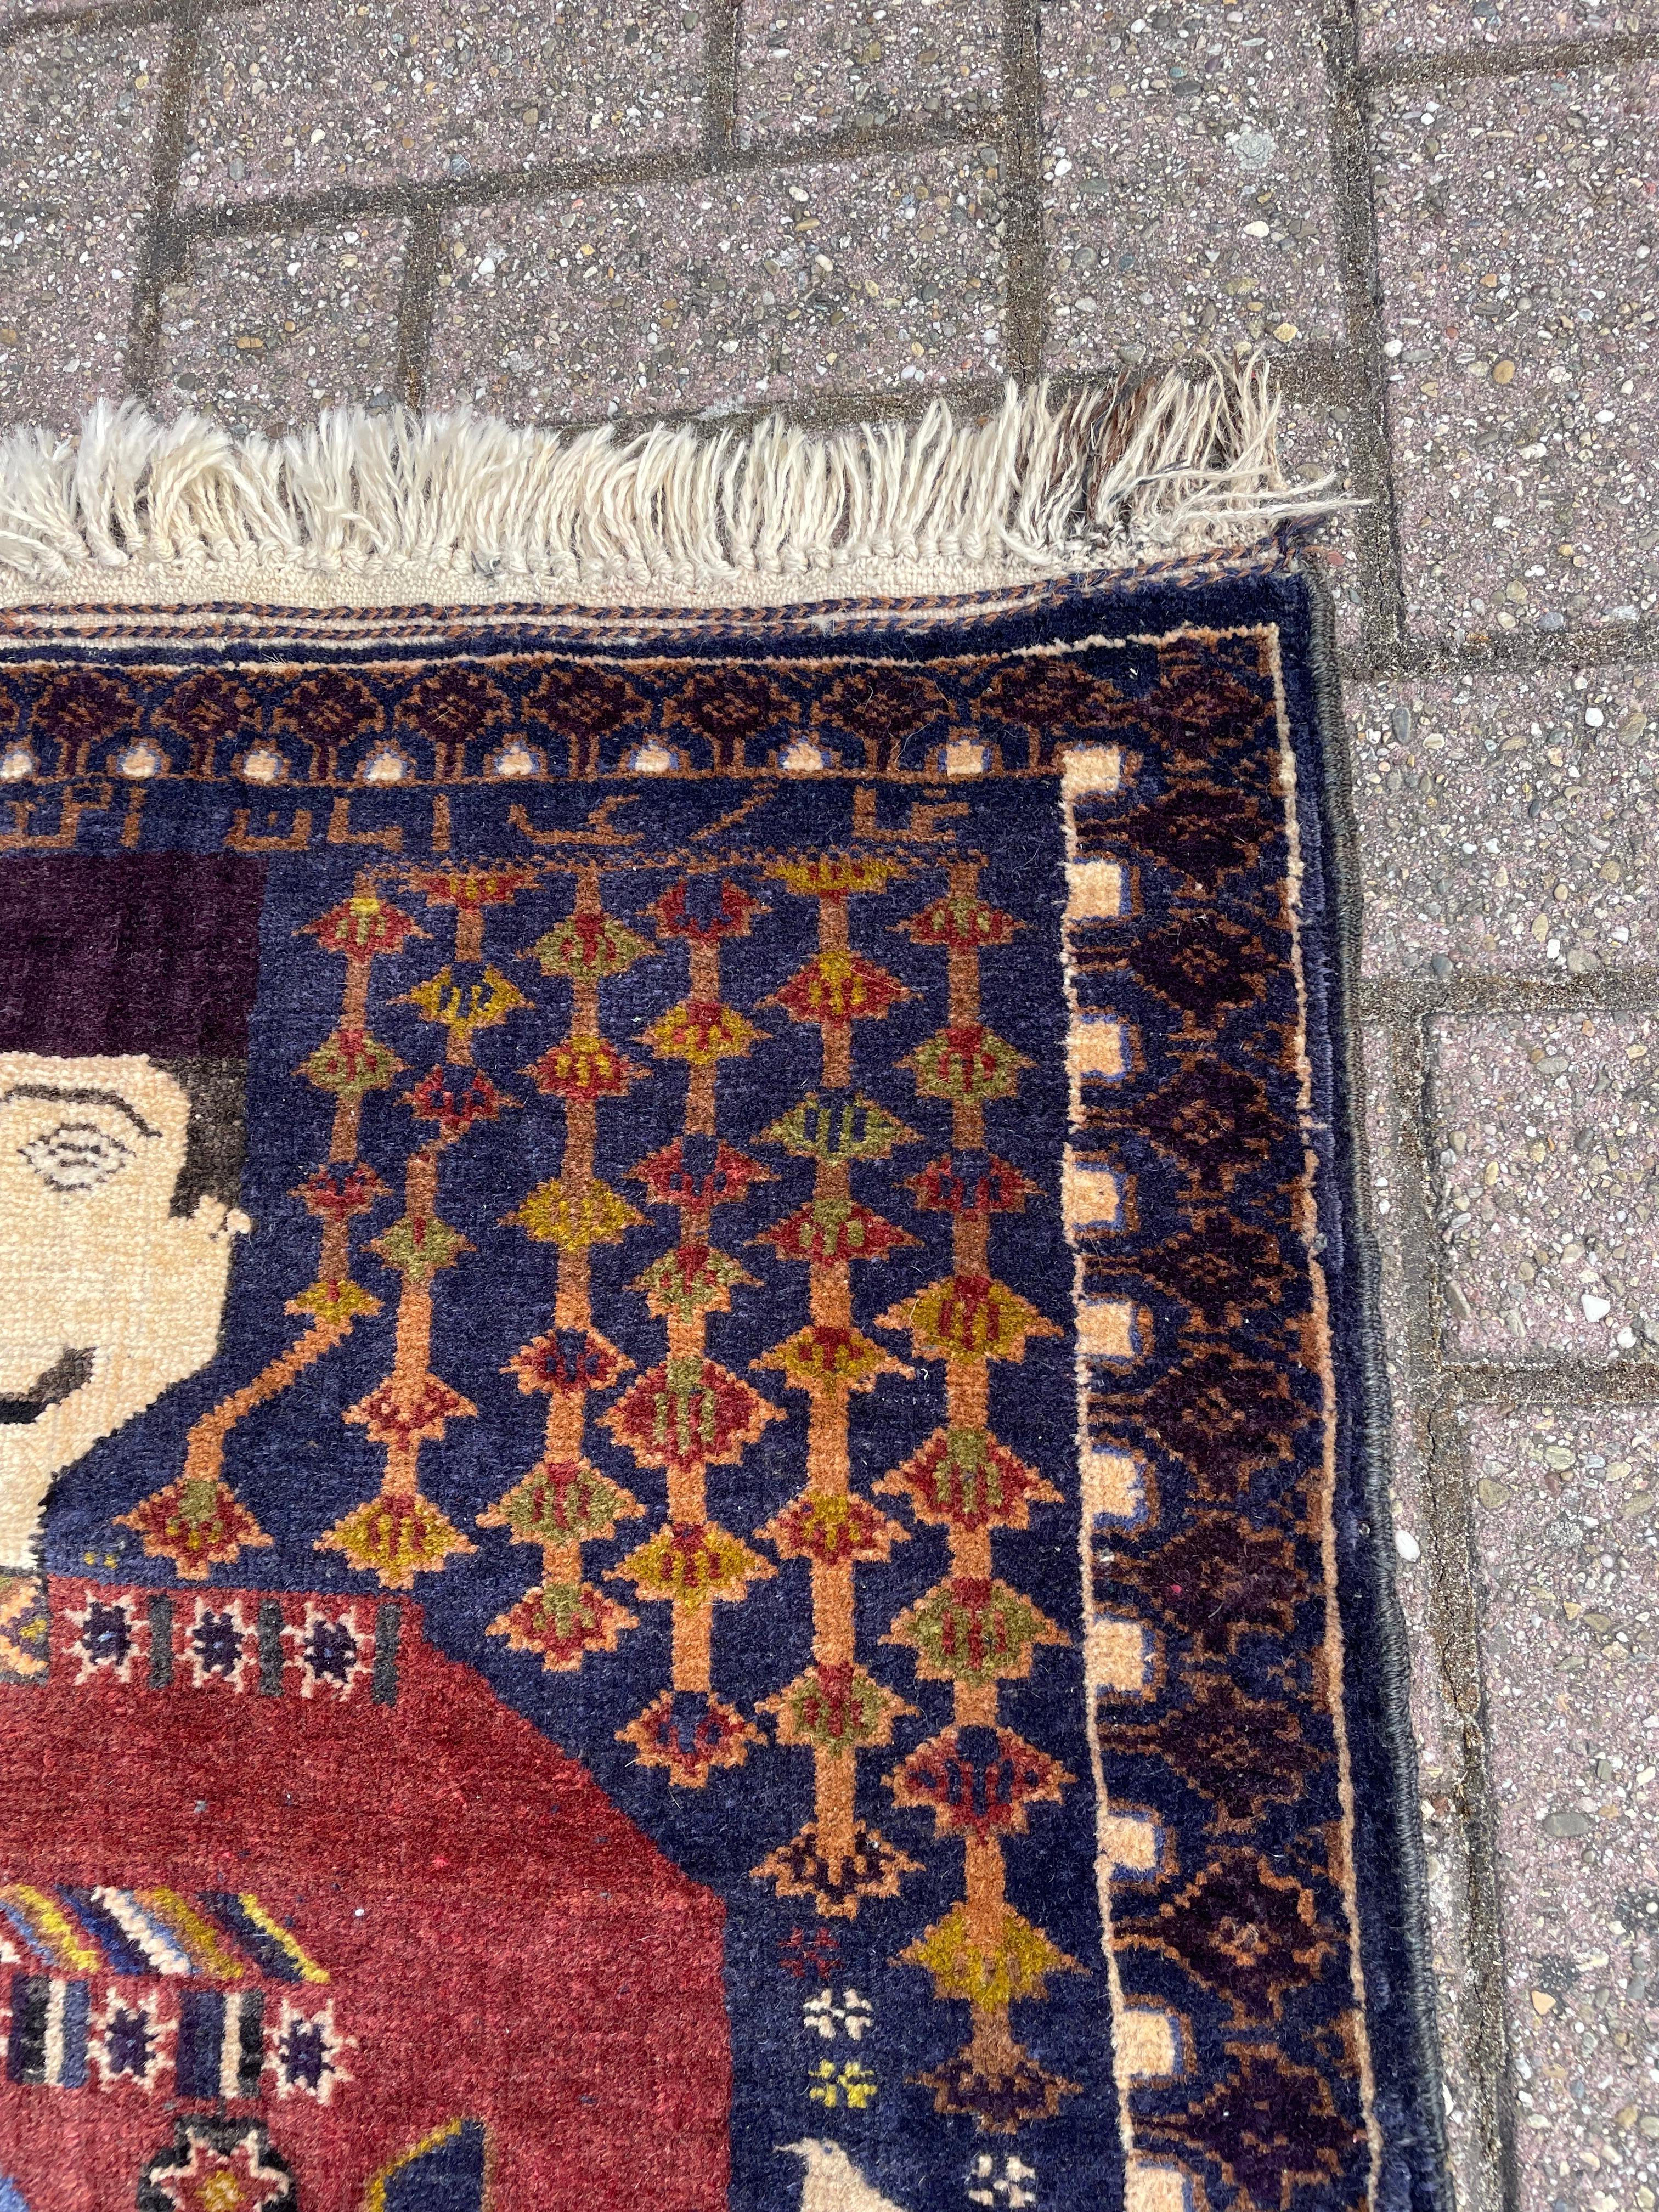 Rare Hand-Knotted War Rug Depicting Reign & King Amanullah Khan 1919 Afghanistan For Sale 6